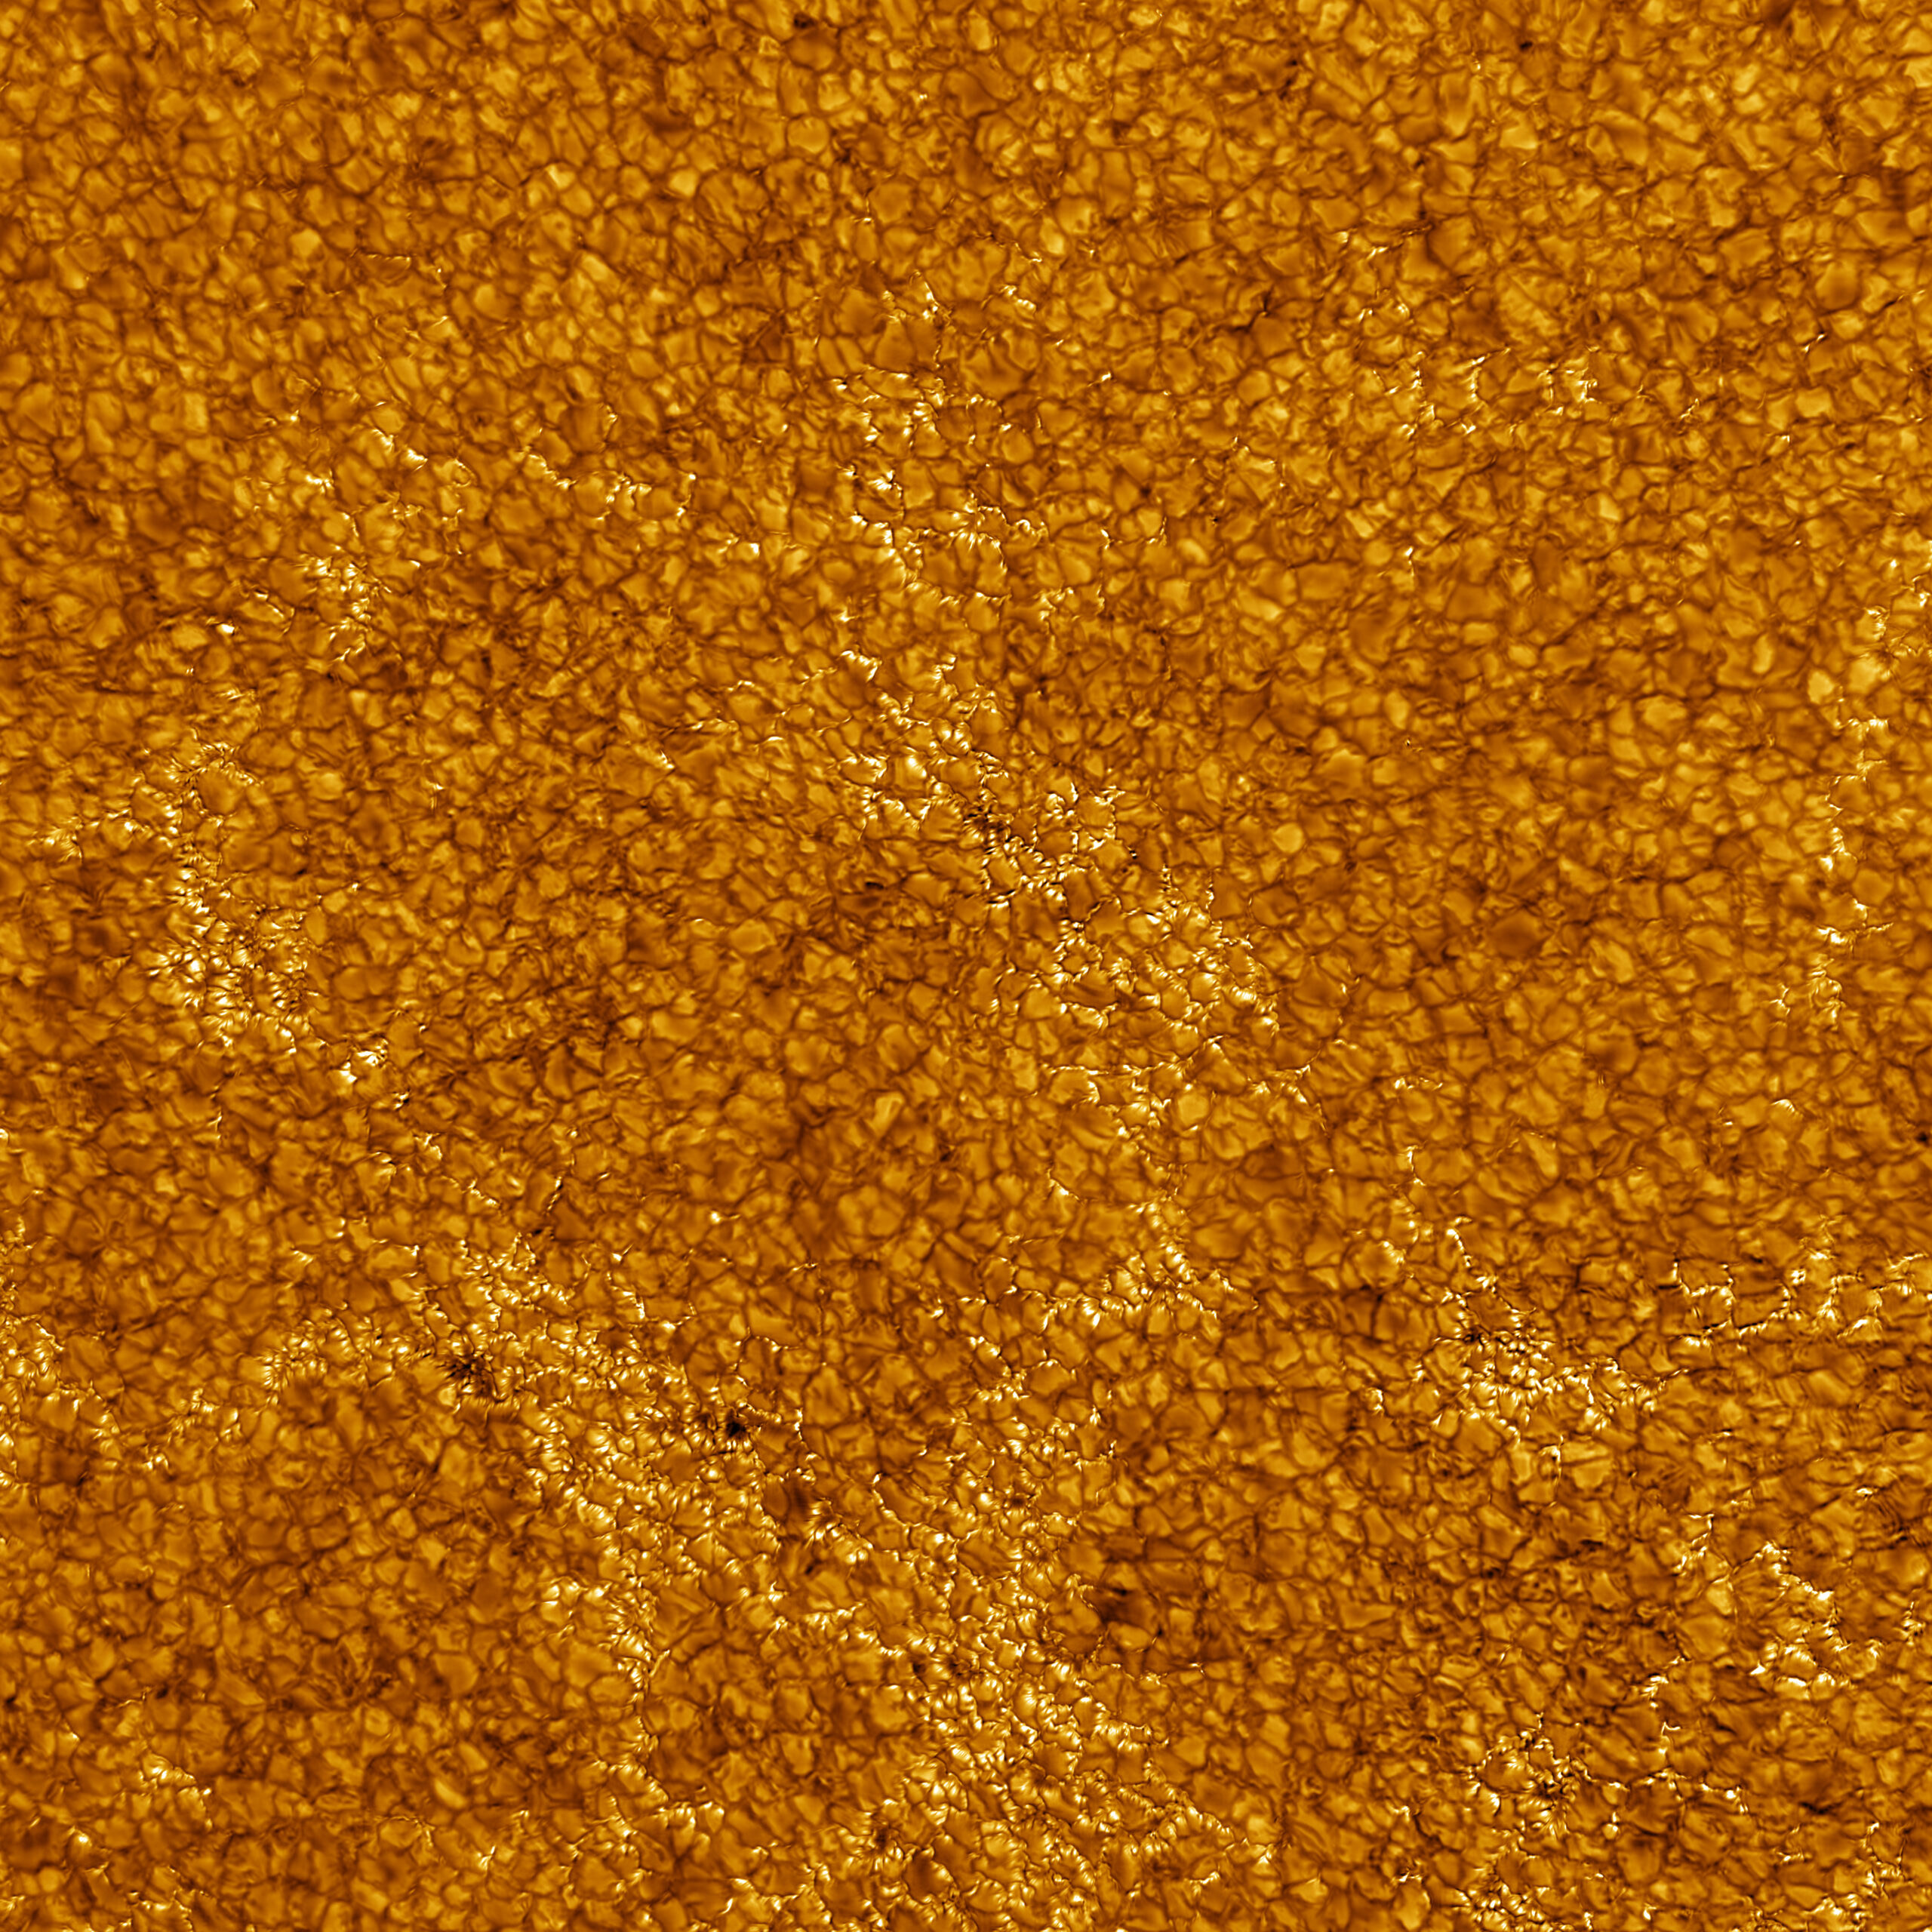 first pictures of the surface of the sun's chromosphere